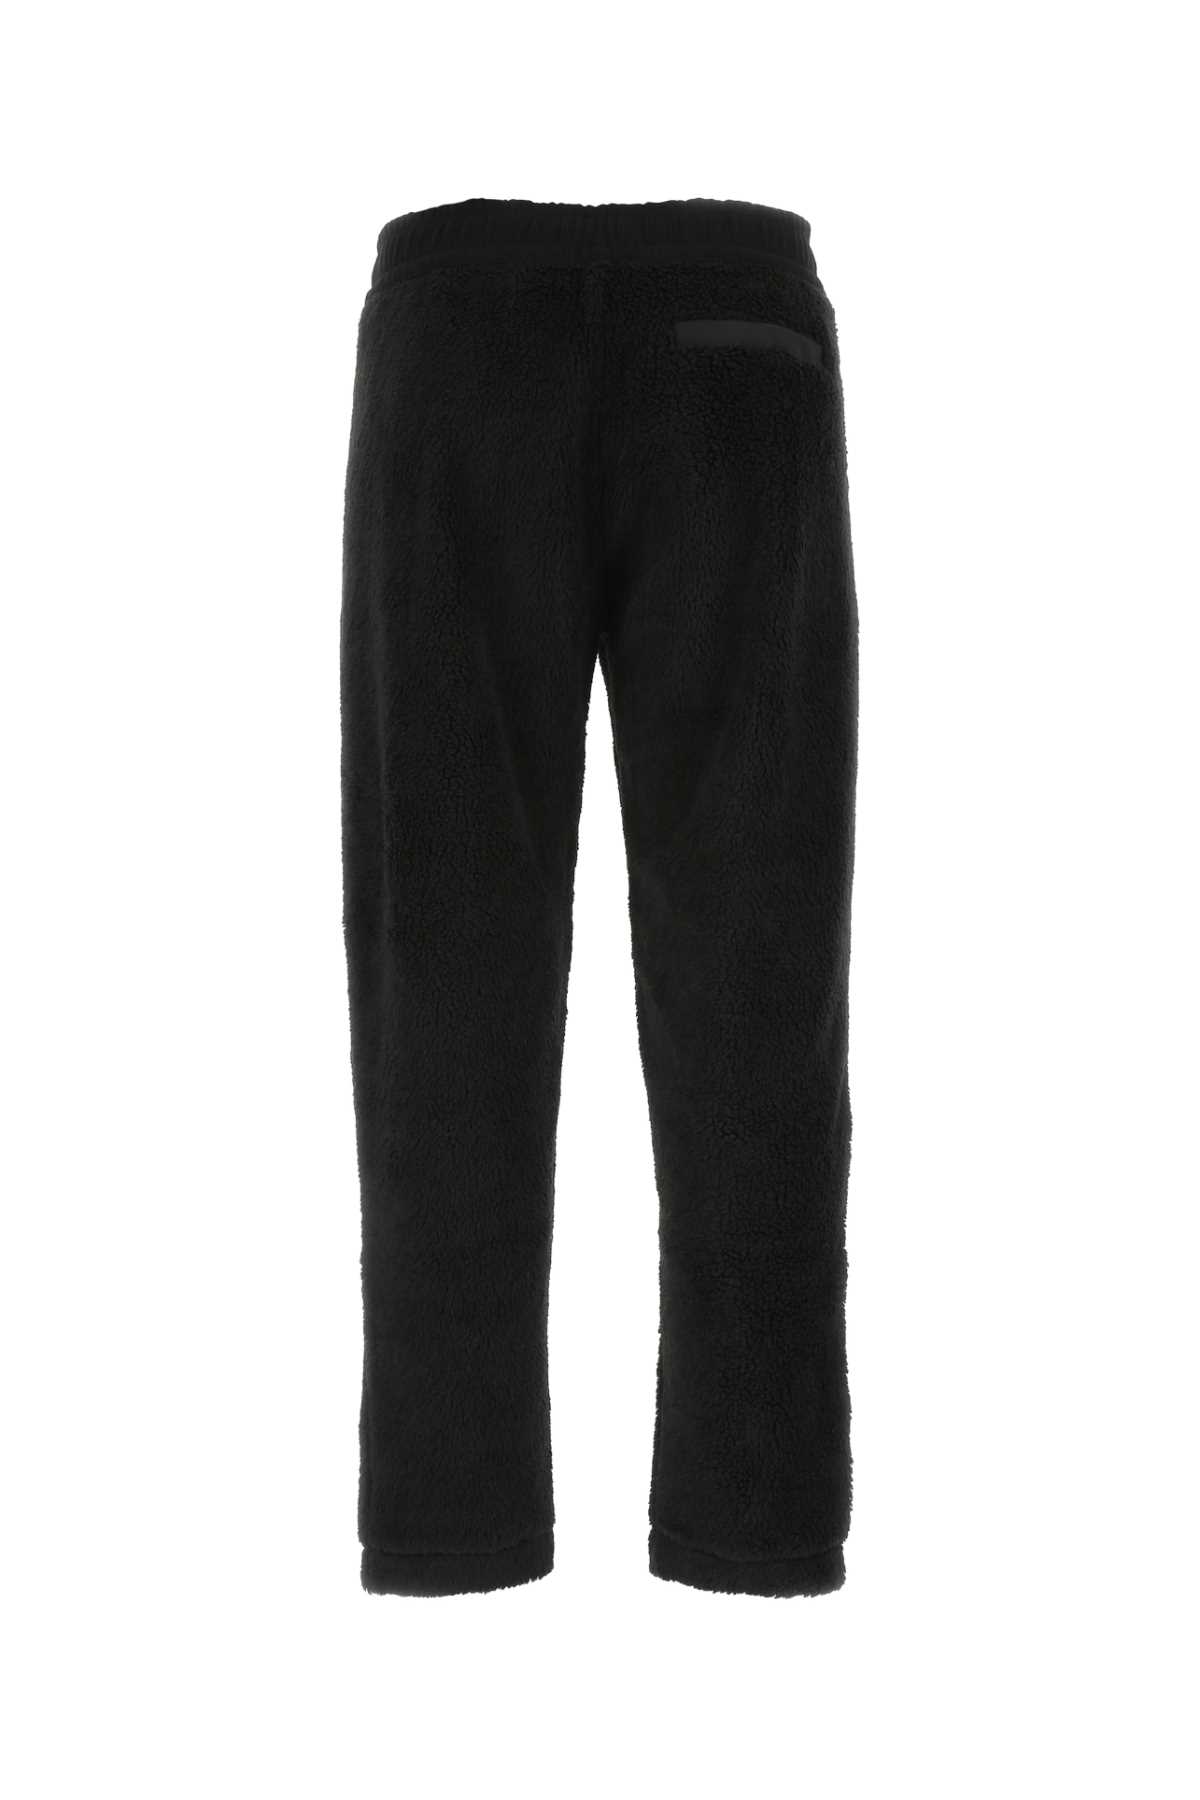 Shop Burberry Black Pile Joggers In A1189